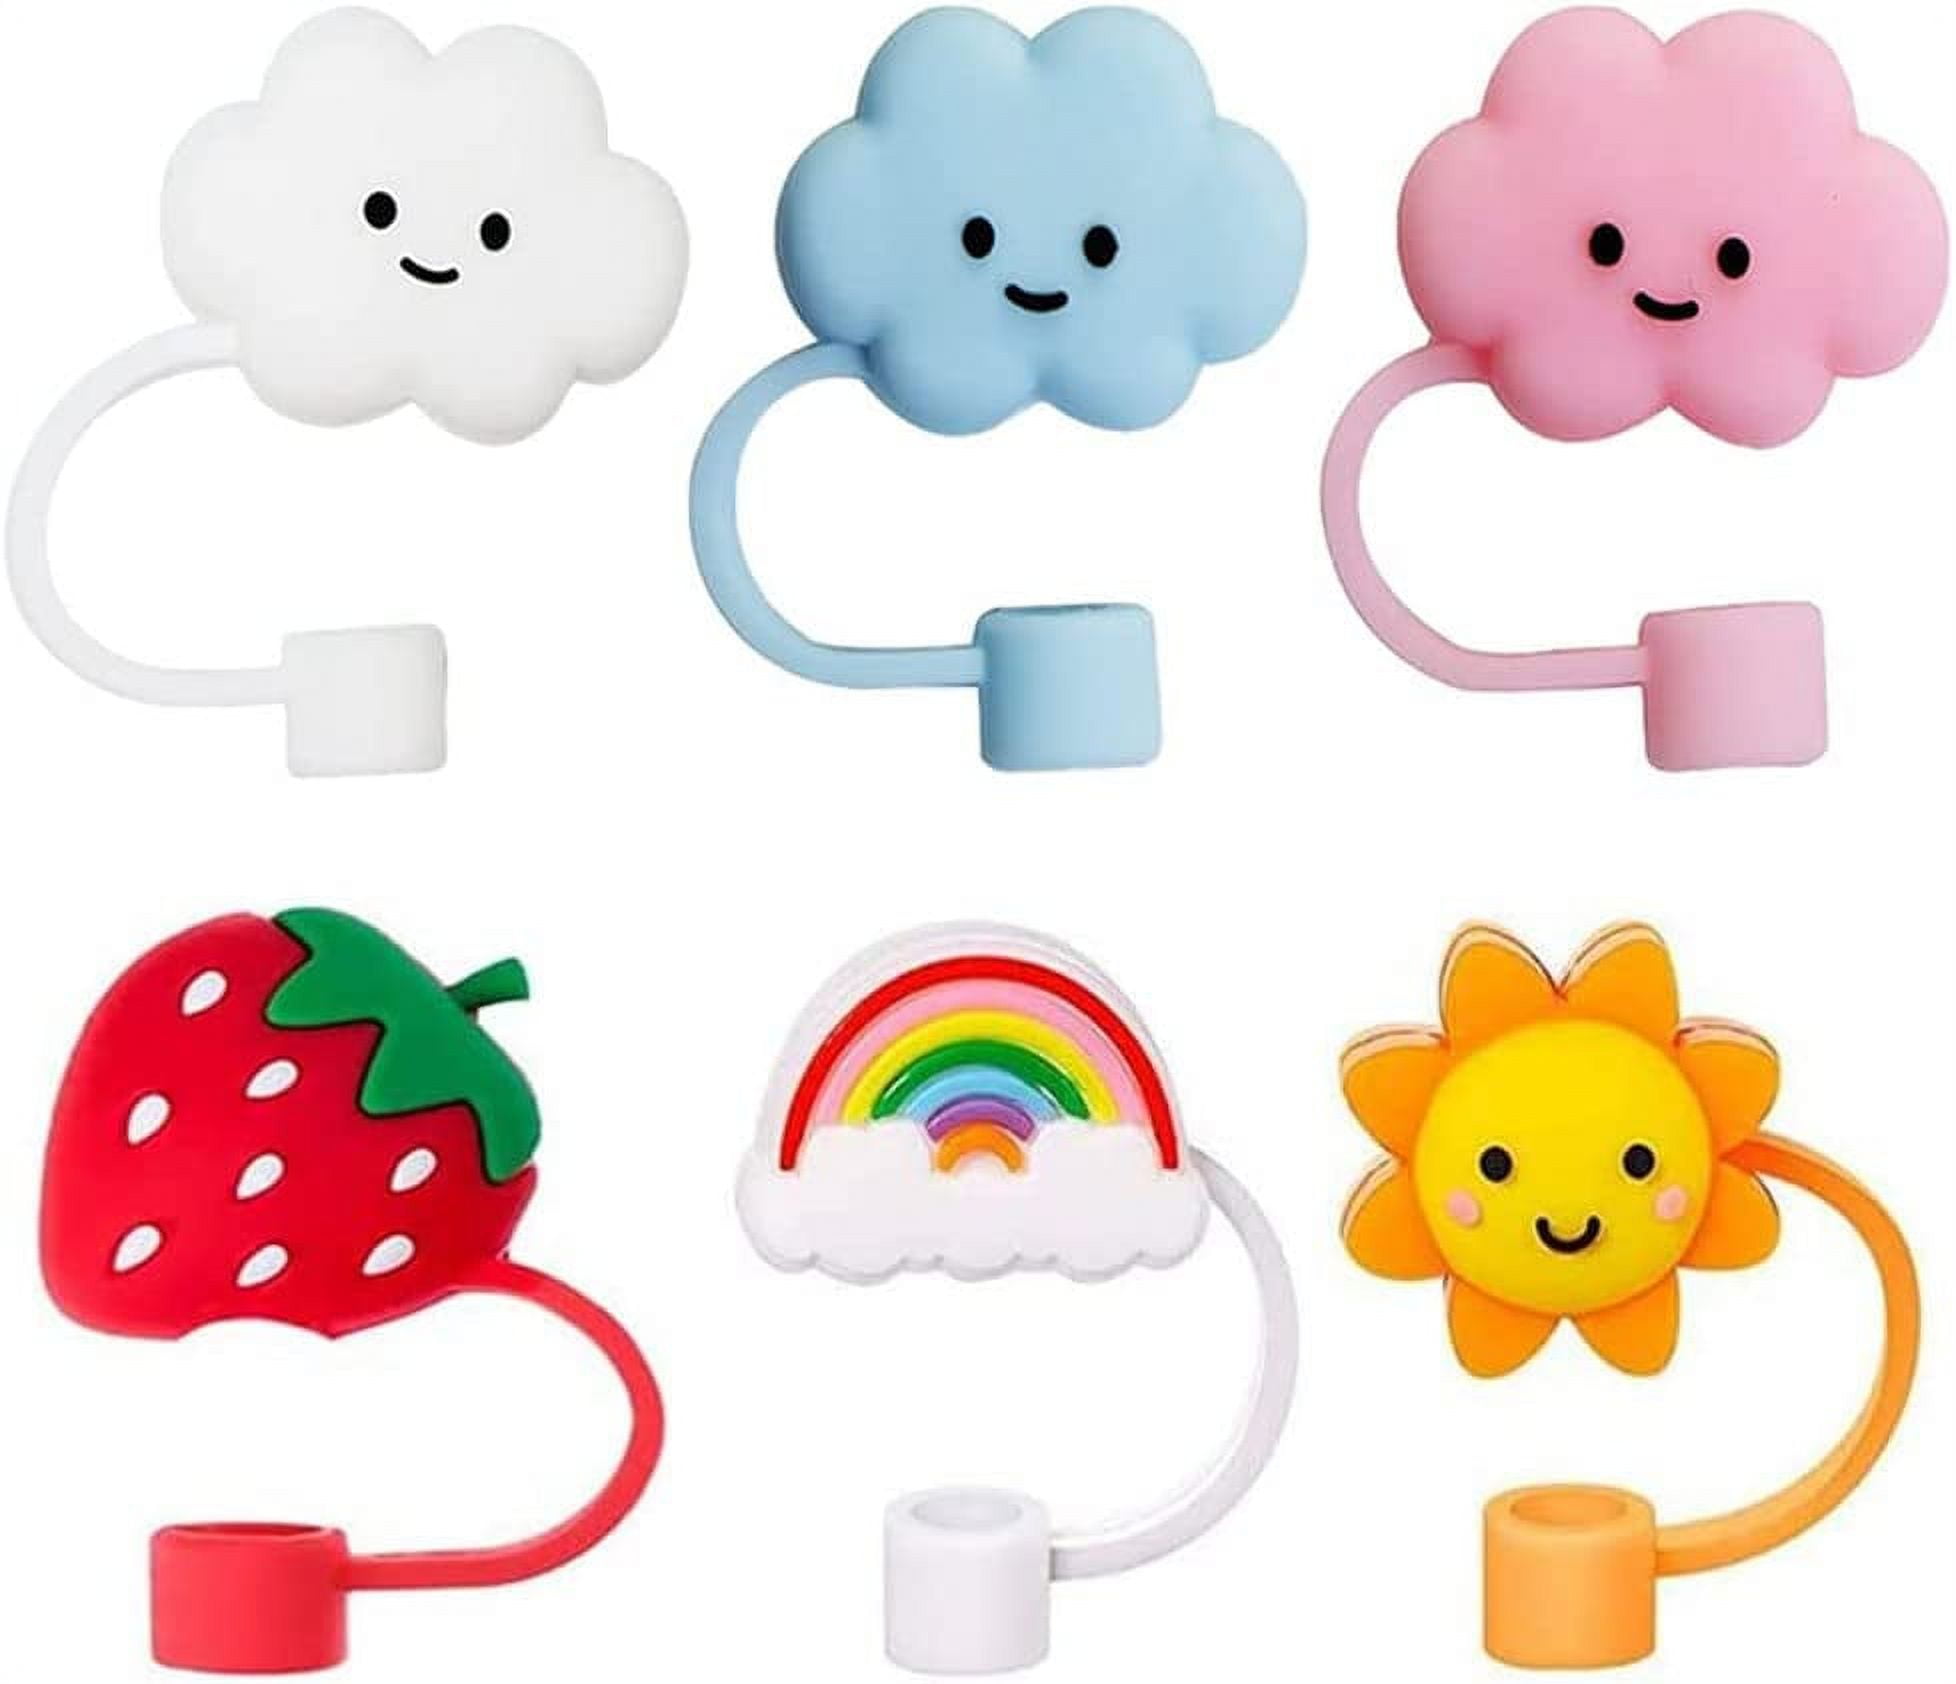 4Pcs Silicone Straw Covers Cap, Straw Tips Cover Straw Covers Cap for  Reusable Straws Cloud Shape Straw Protector. The Clouds, Rainbow,  Strawberry